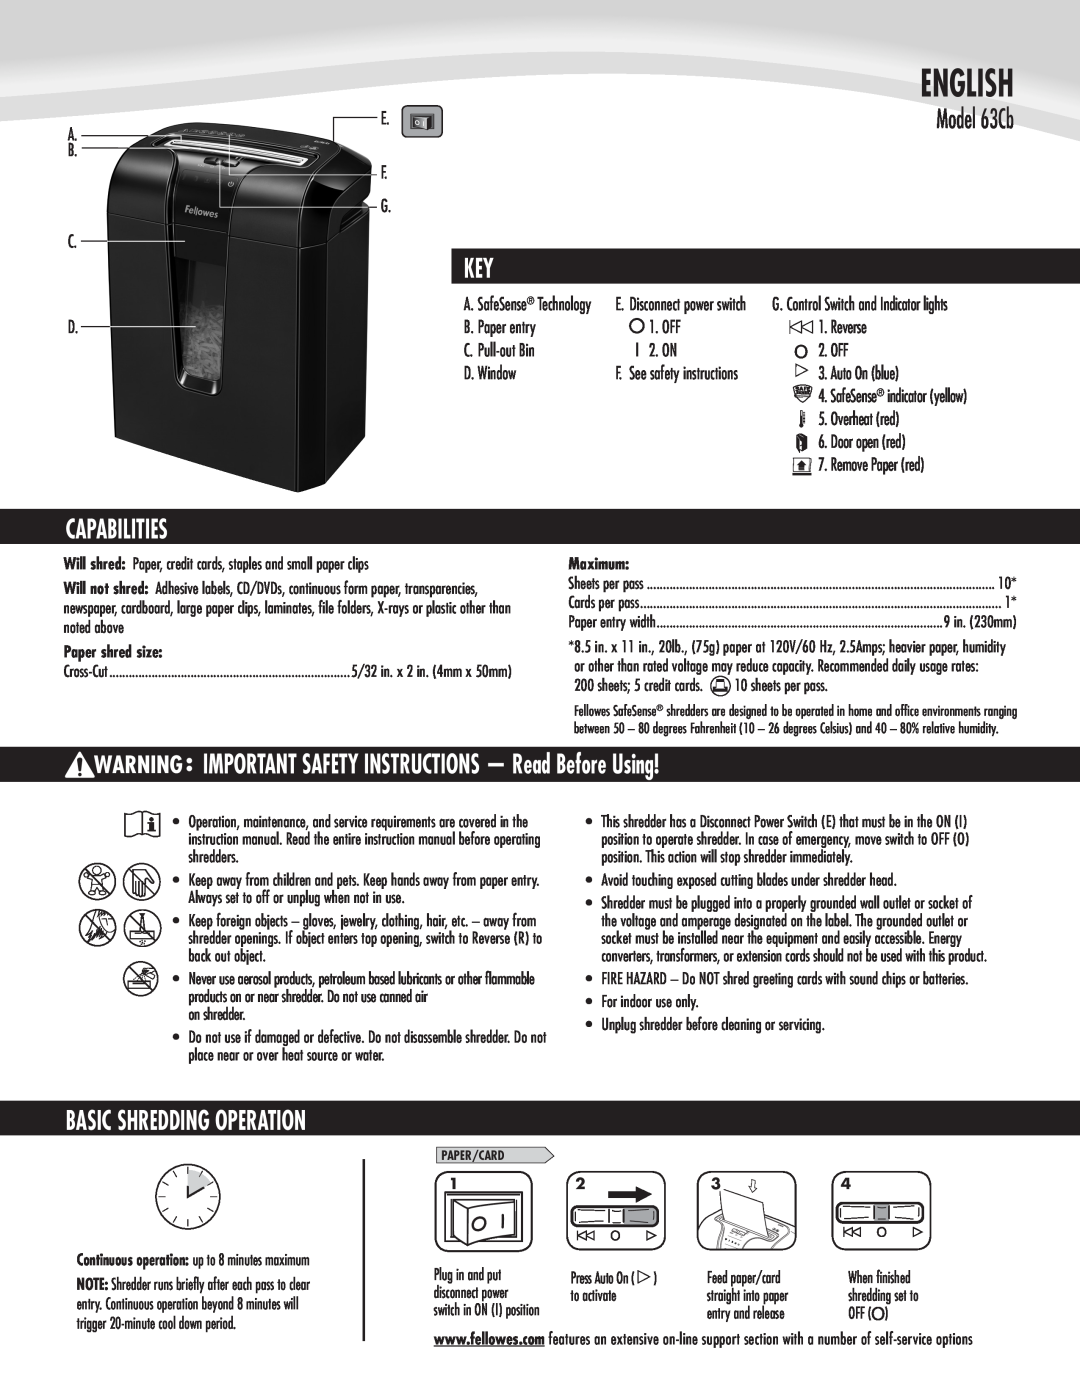 Fellowes 63cb manual Capabilities, IMPORTANT SAFETY INSTRUCTIONS - Read Before Using, English, Model 63Cb 